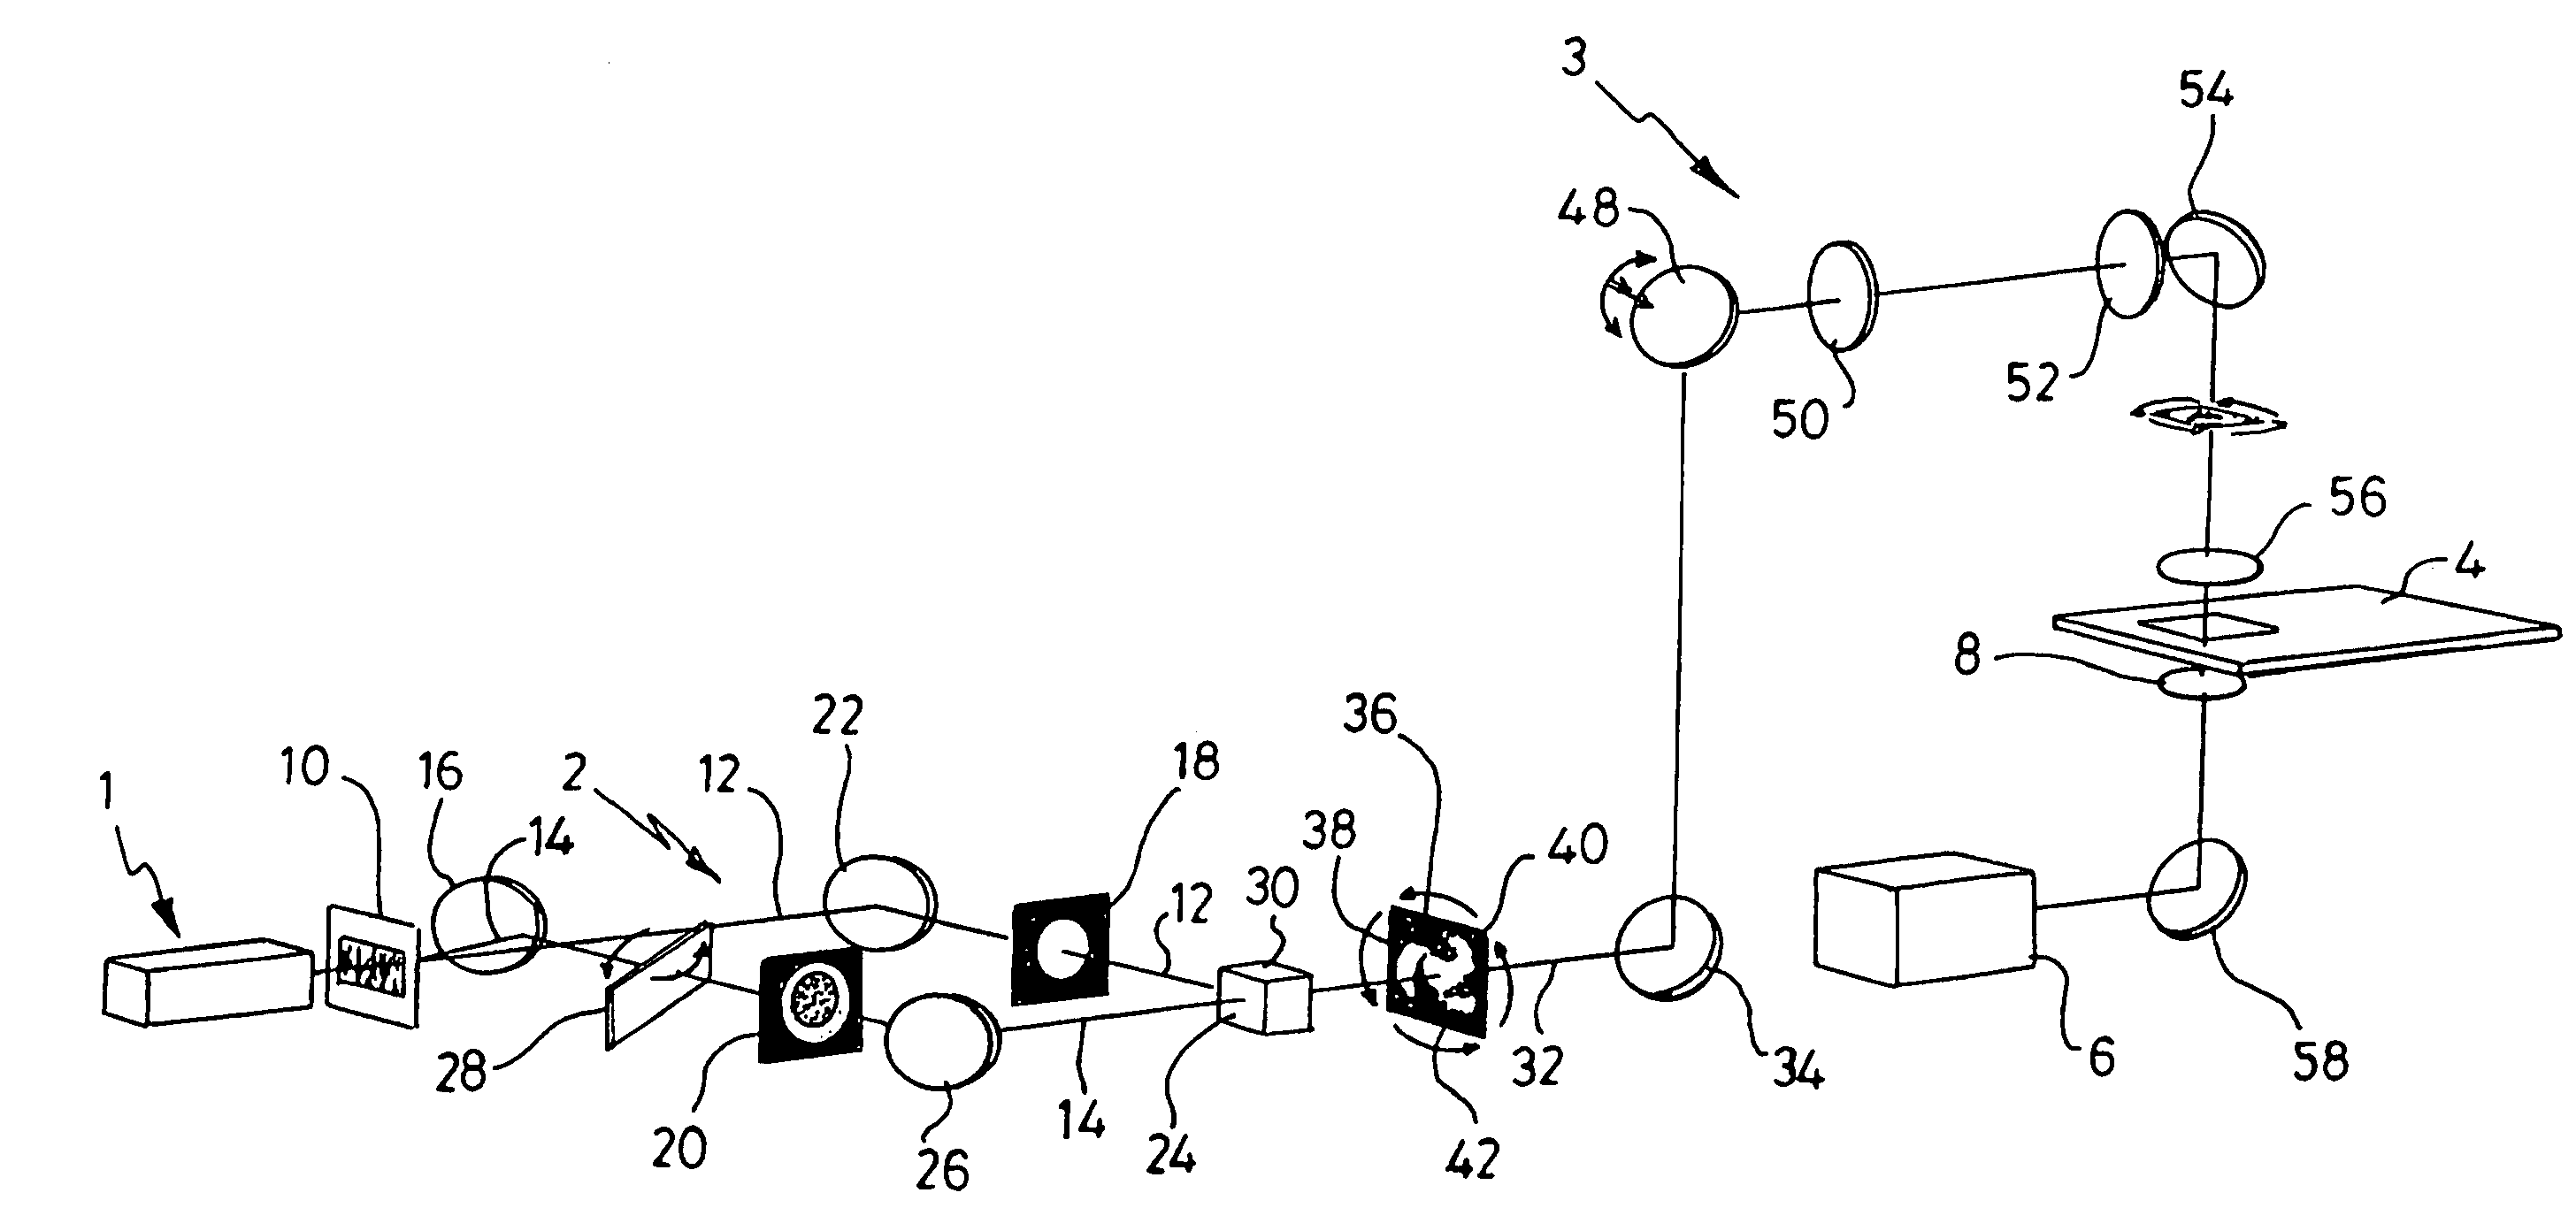 Apparatus for optically rotating microscopic objects